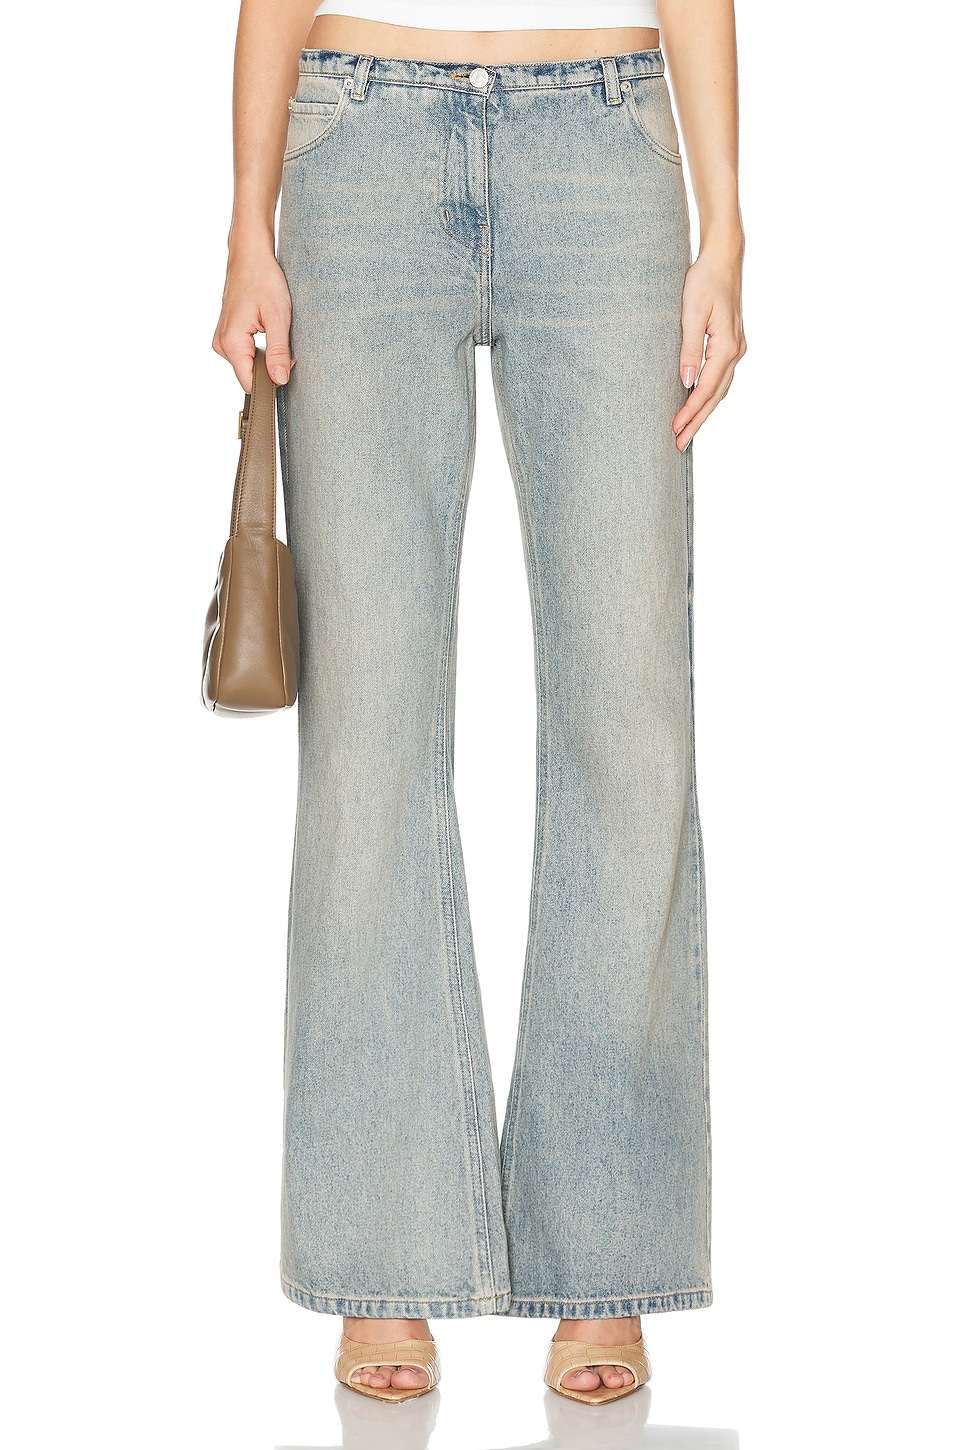 Image 1 of Courreges Relax Denim Bootcut in Light Blue Wash